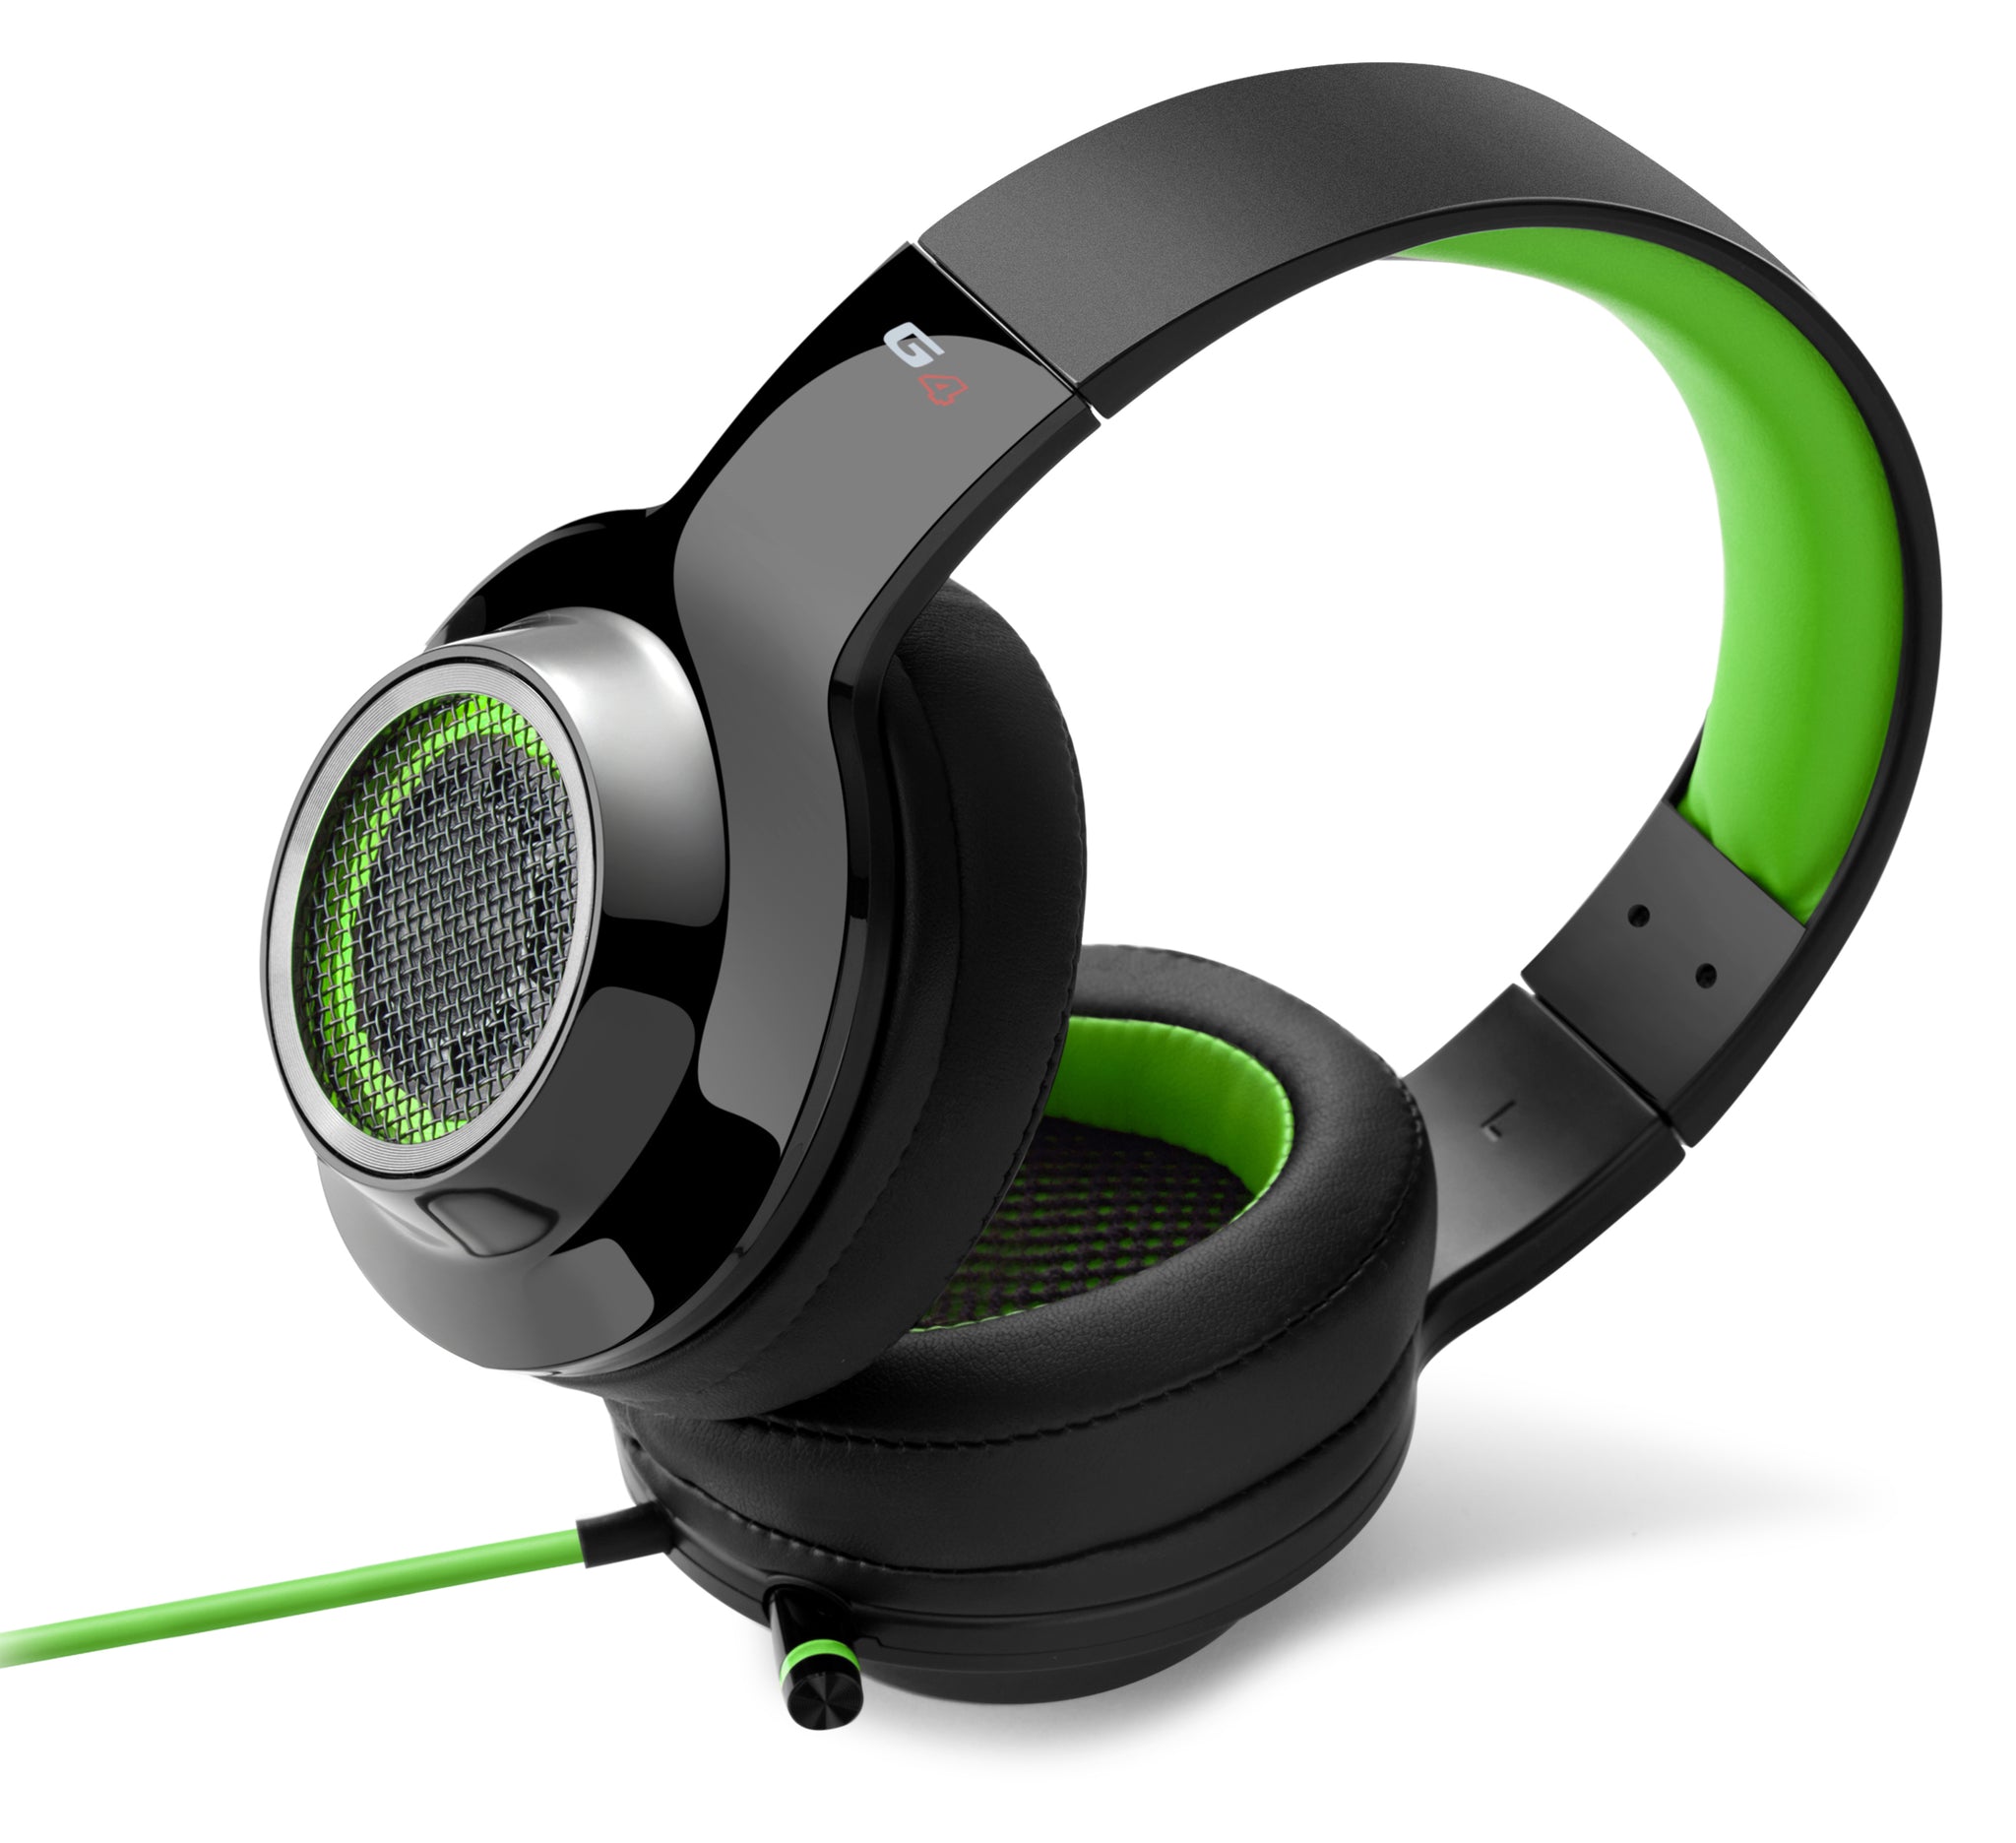 Edifier G4 Professional 7.1 Virtual Surround Sound USB Gaming Headset With Microphone - Black / Green